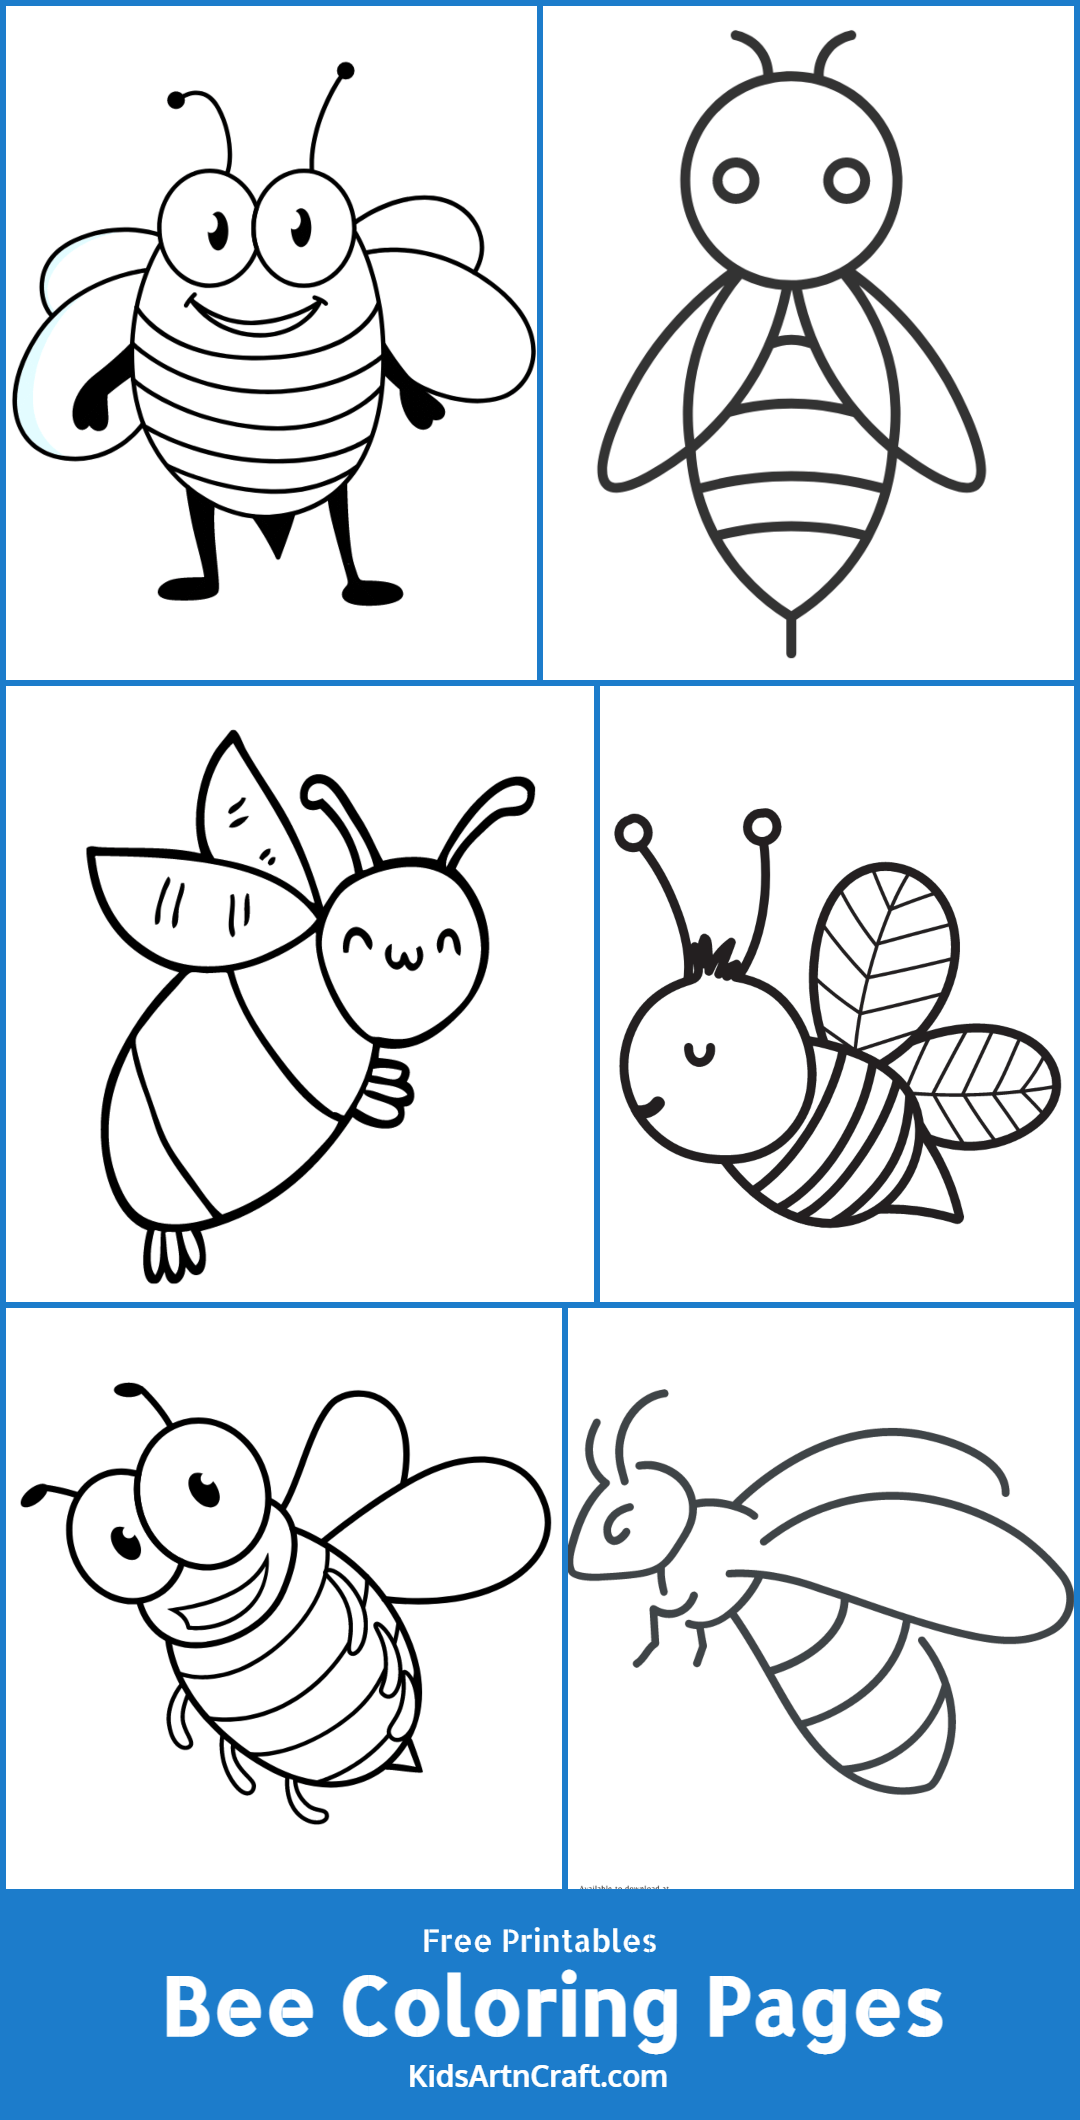 Bee Coloring Pages For Kids – Free Printables